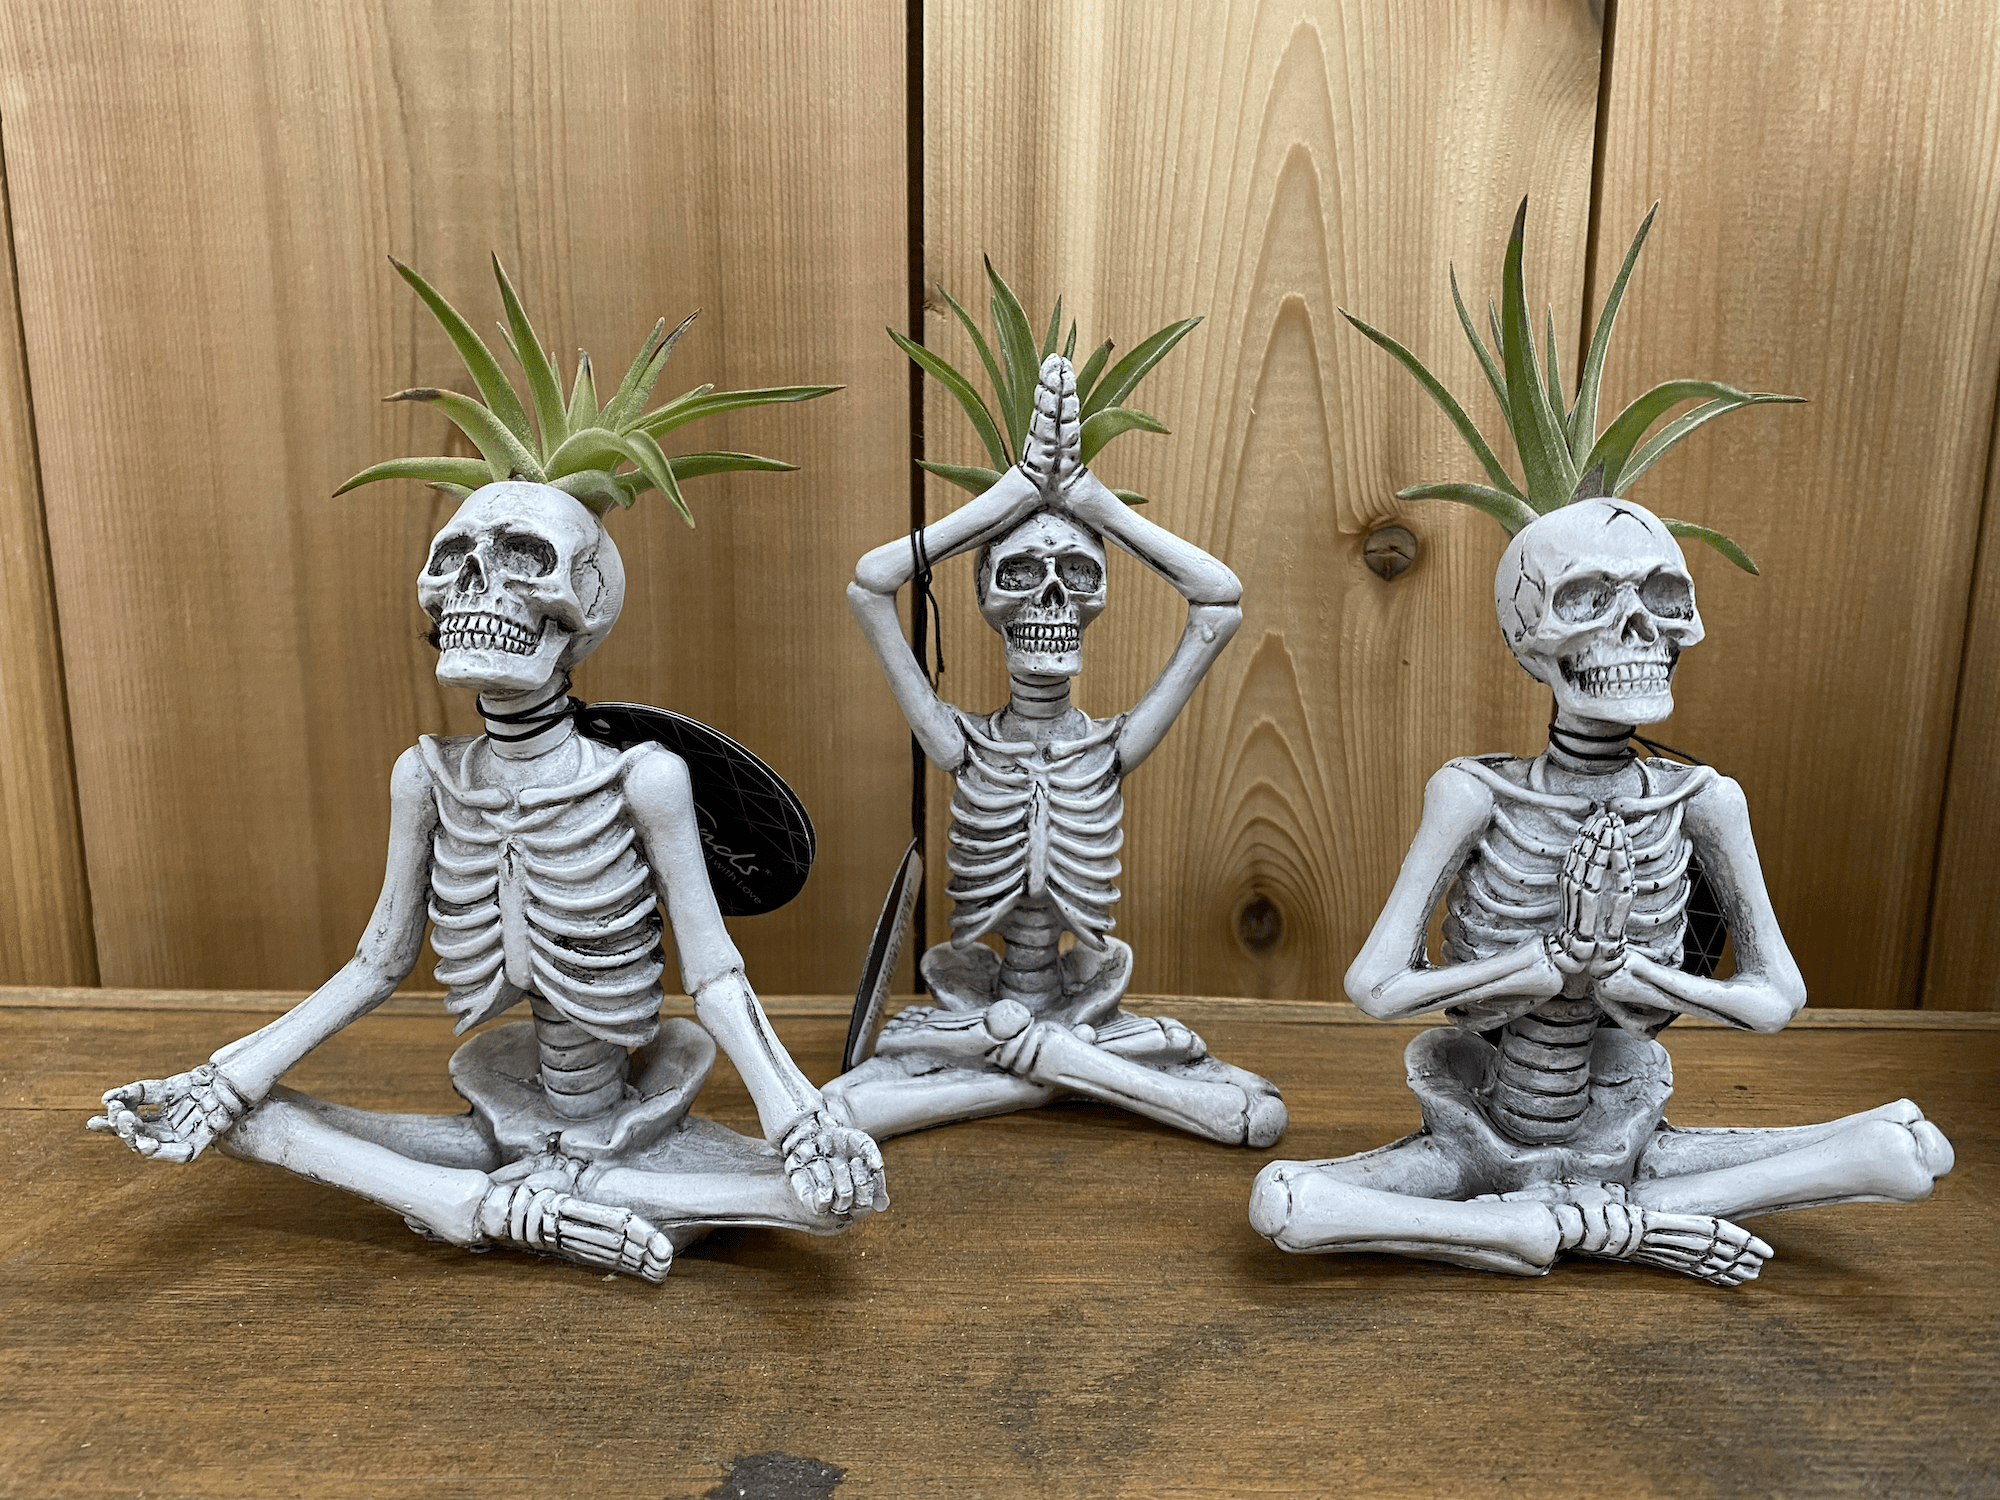 Trader Joe's Halloween Yoga Skeletons Have Already Been Spotted in Stores